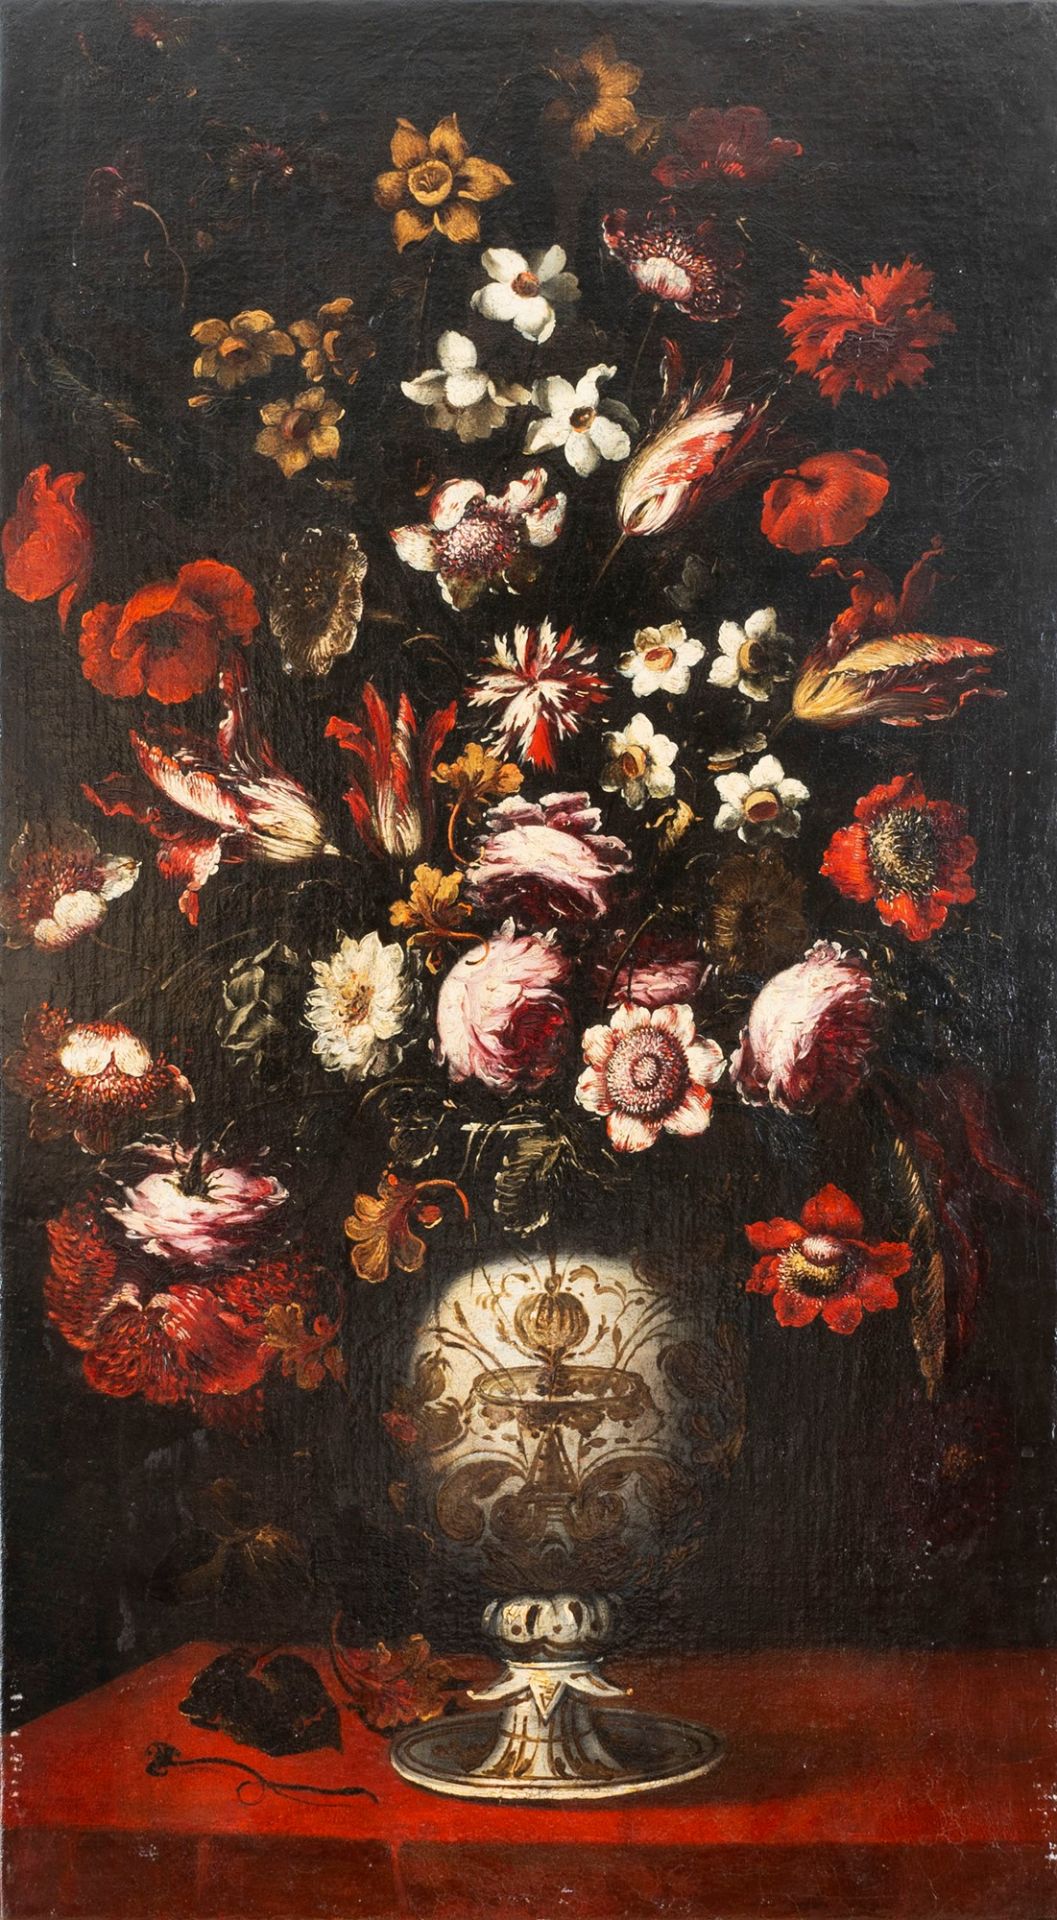 Neapolitan school, XVII century - Roses, daffodils, carnations and other flowers in a decorated vase